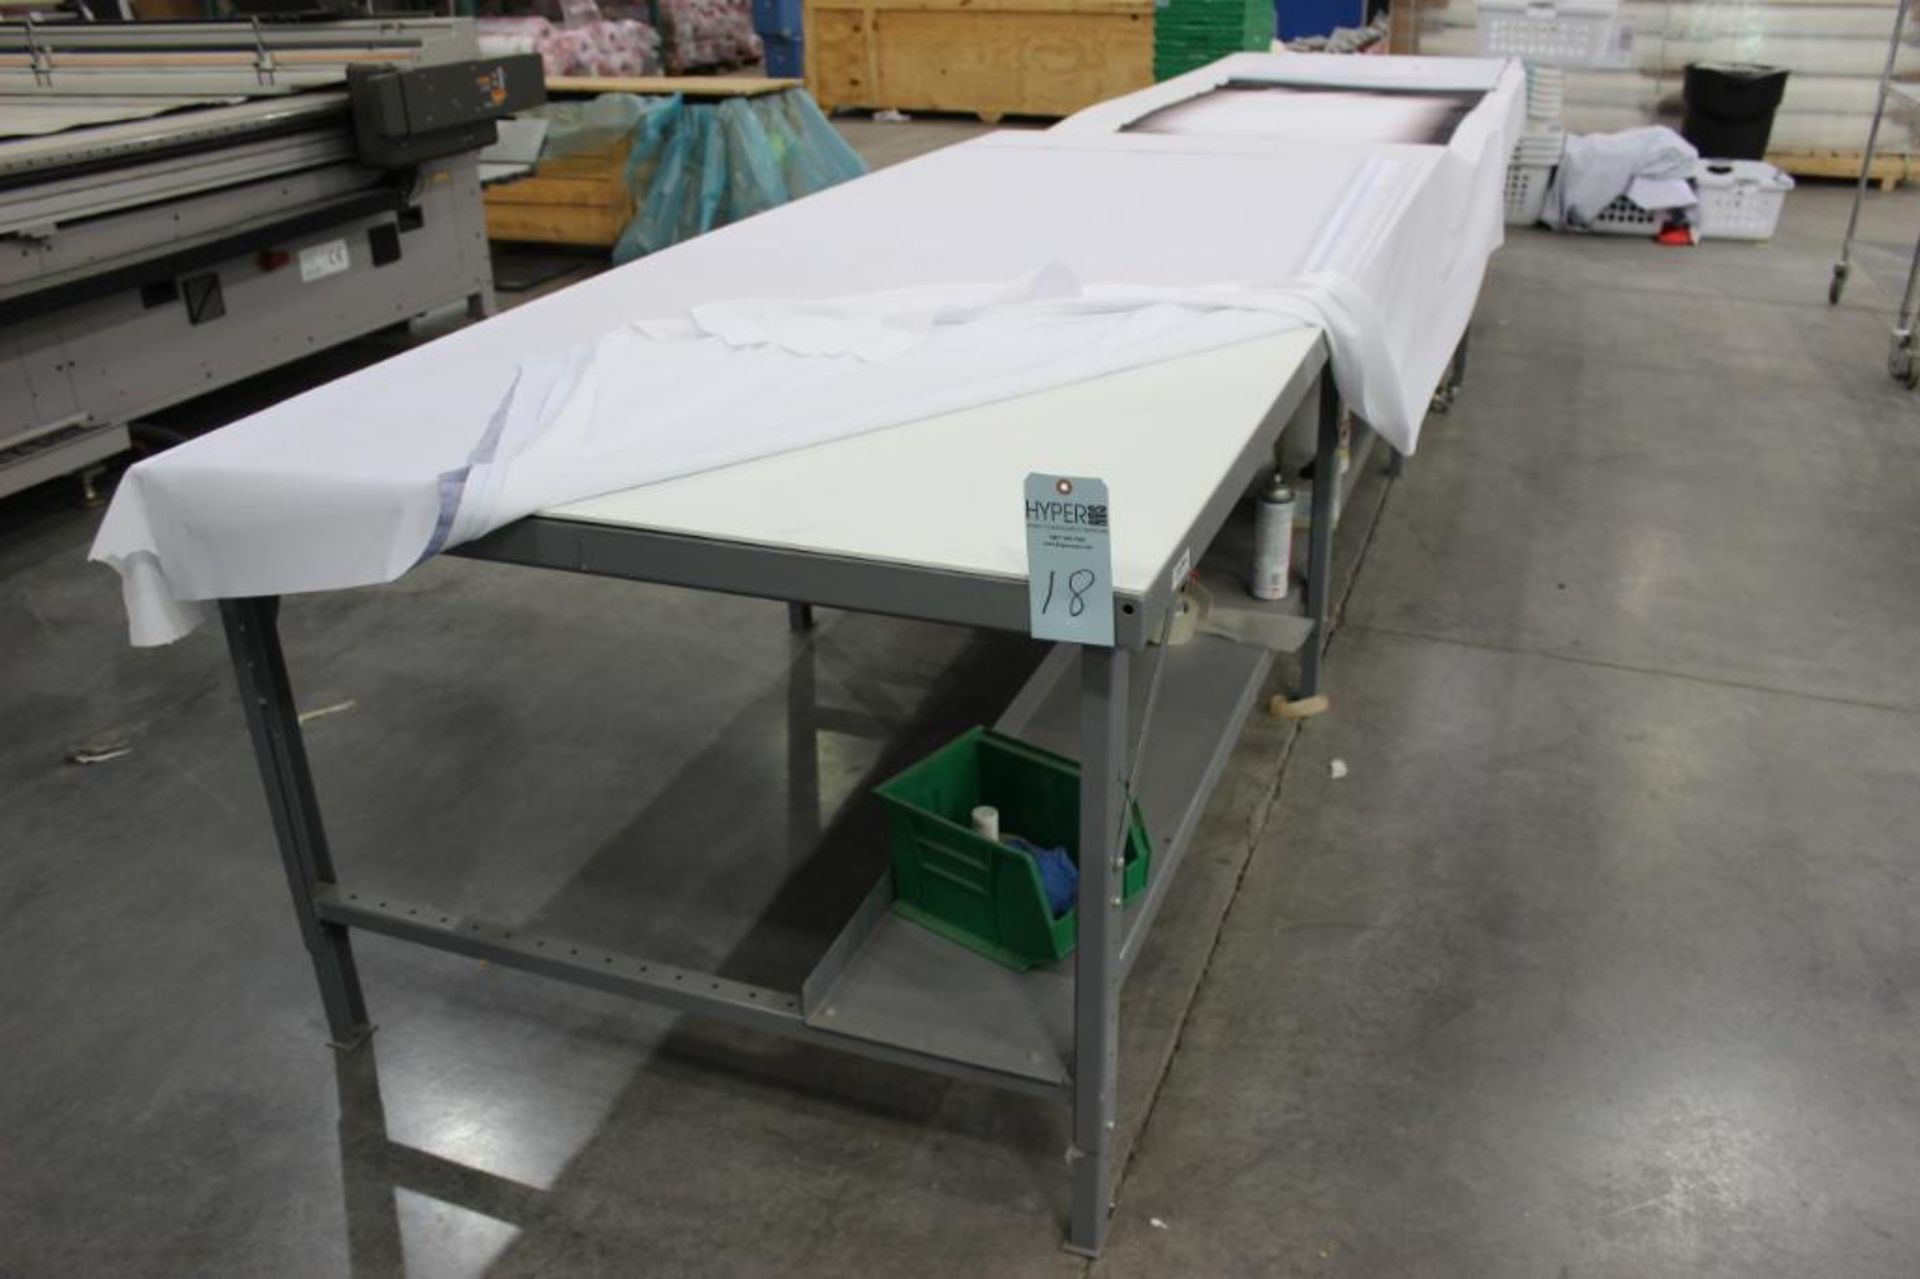 (2) 5' x 10'6” cutting tables (no contents on top)